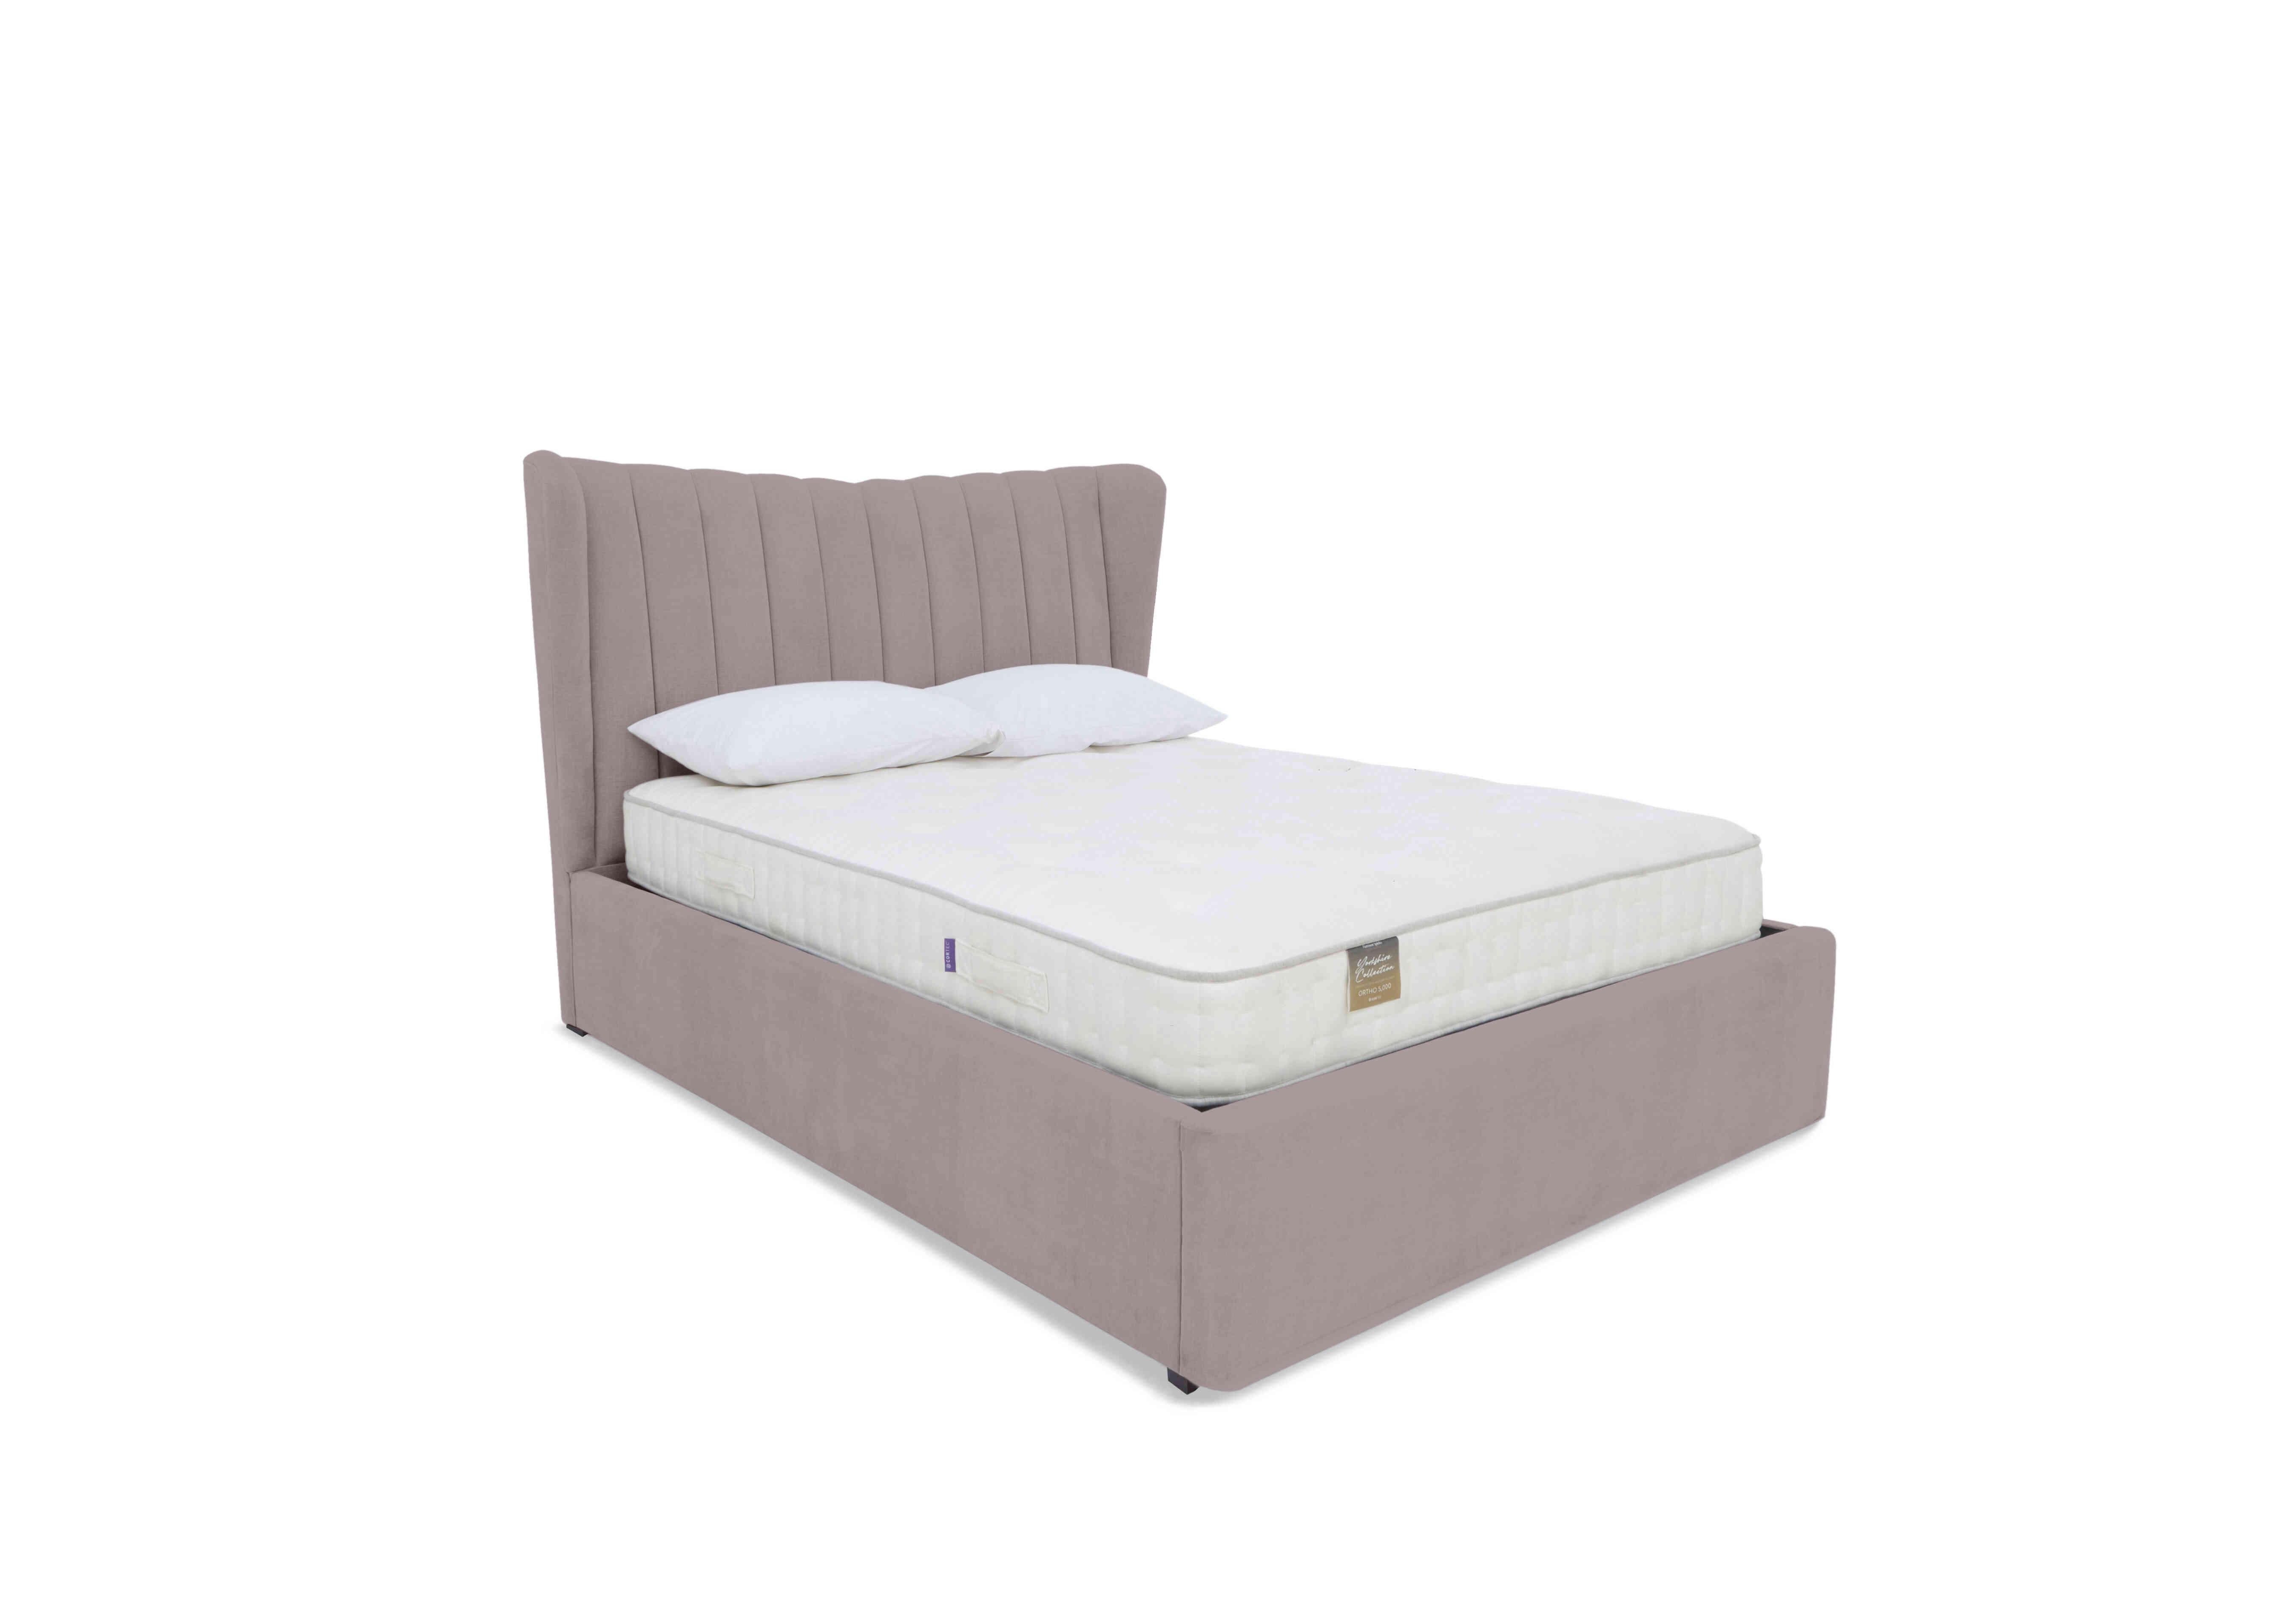 Bourne Ottoman Bed Frame in Plush Lilac on Furniture Village